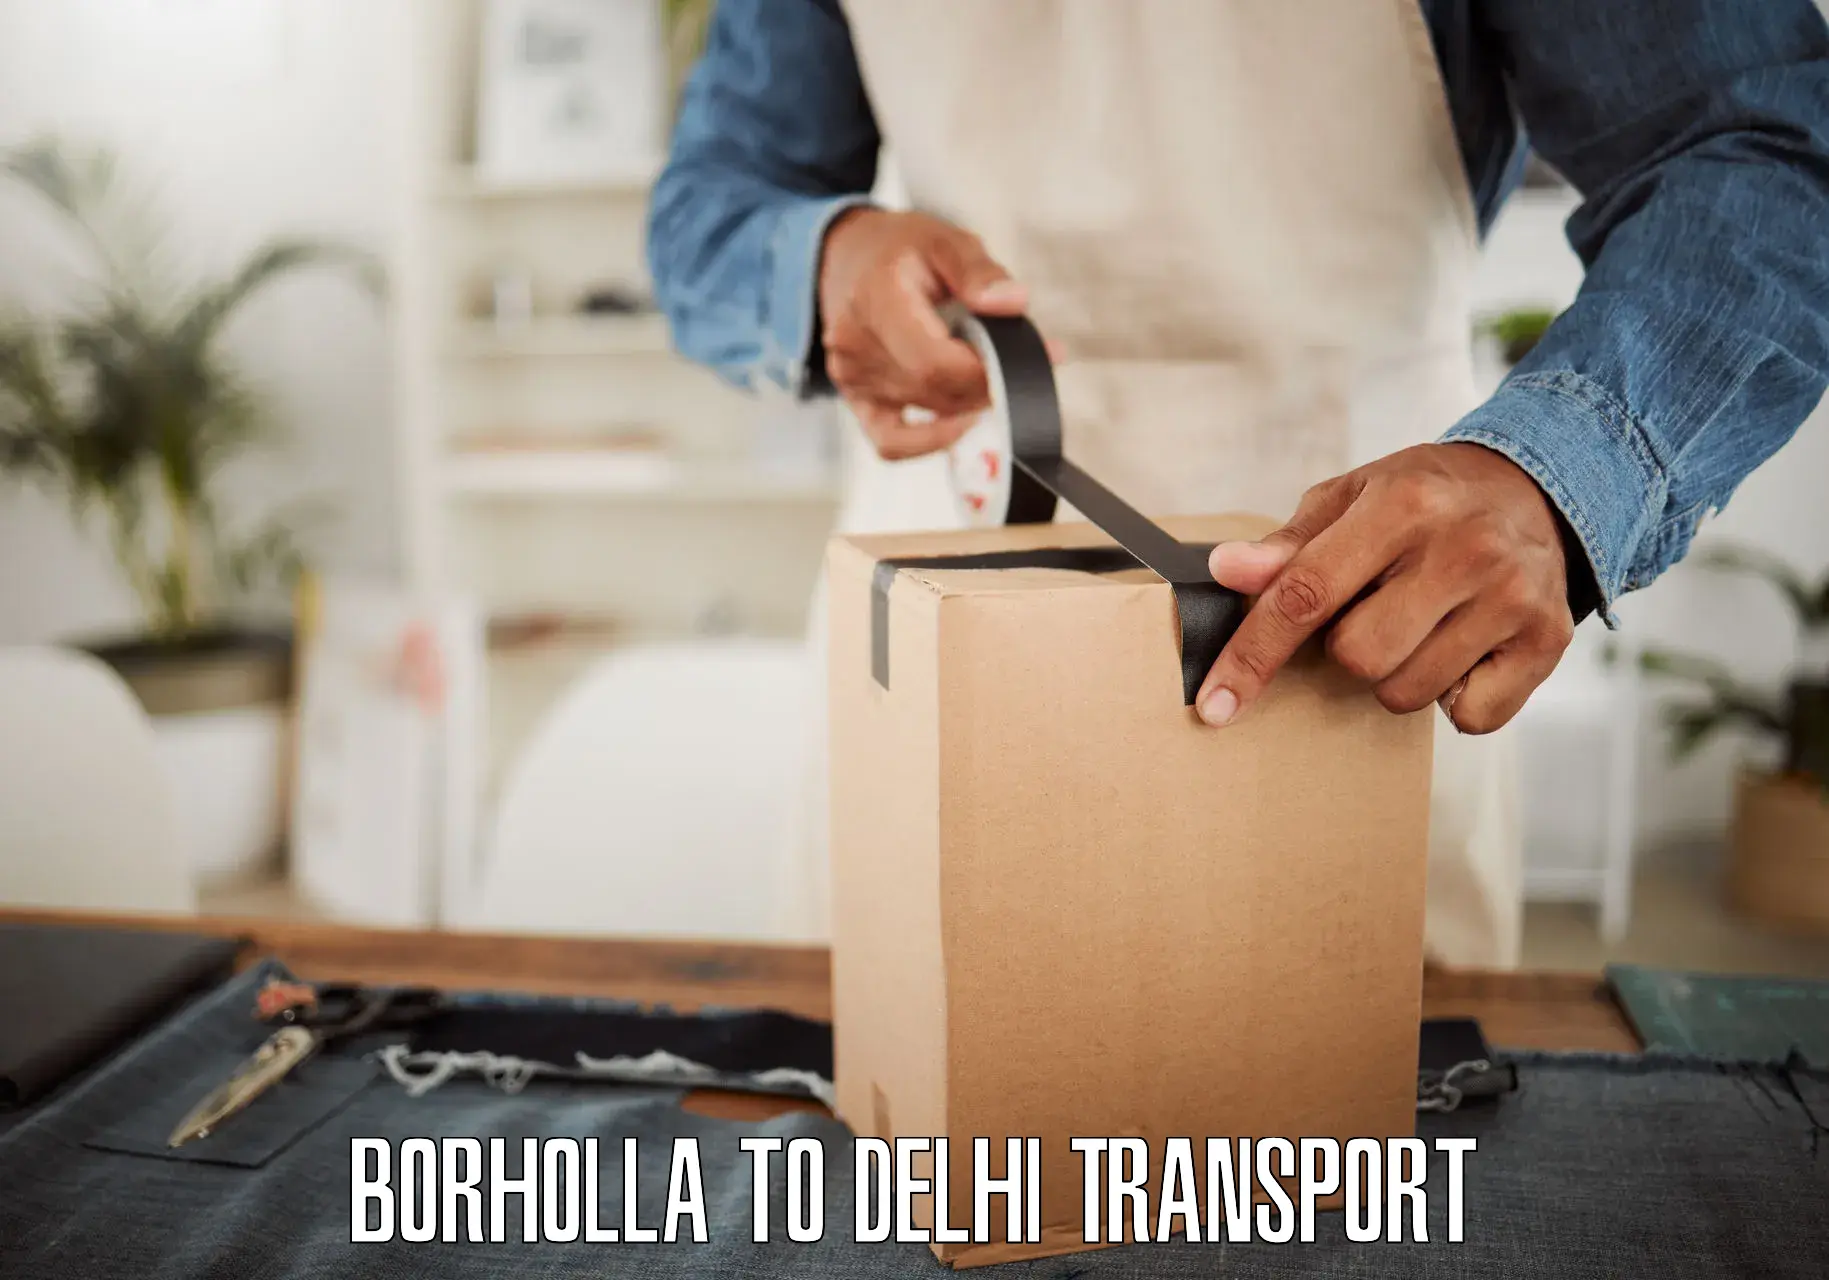 Truck transport companies in India Borholla to Lodhi Road